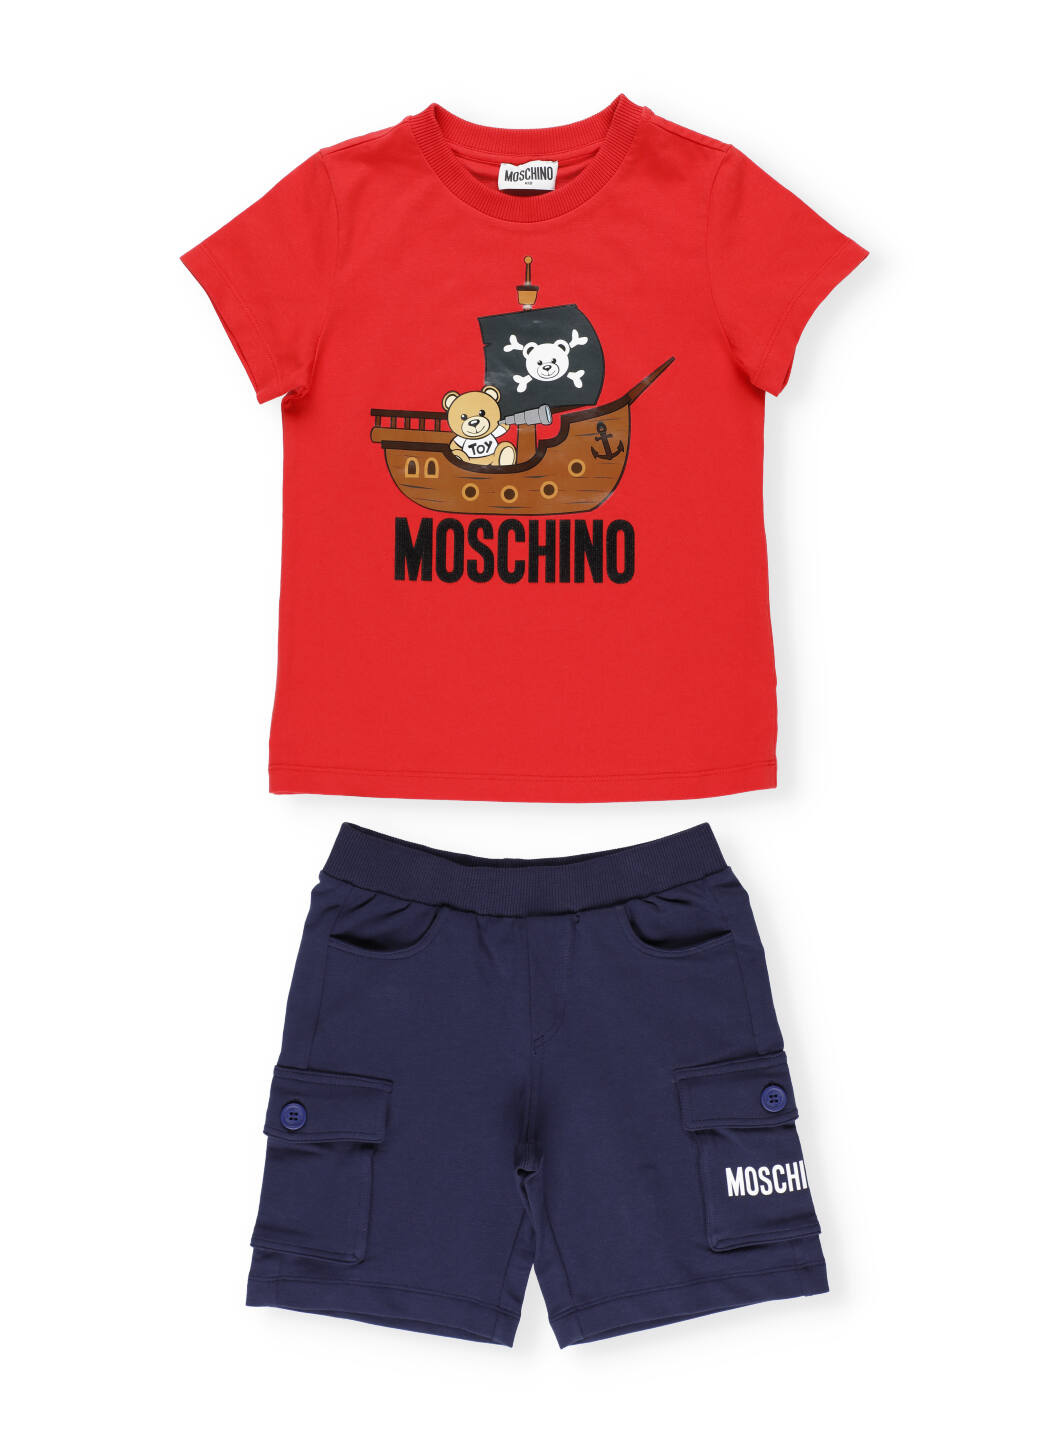 Moschino Kids' Cotton T-shirt And Short Set In Poppy Red/blue Navy